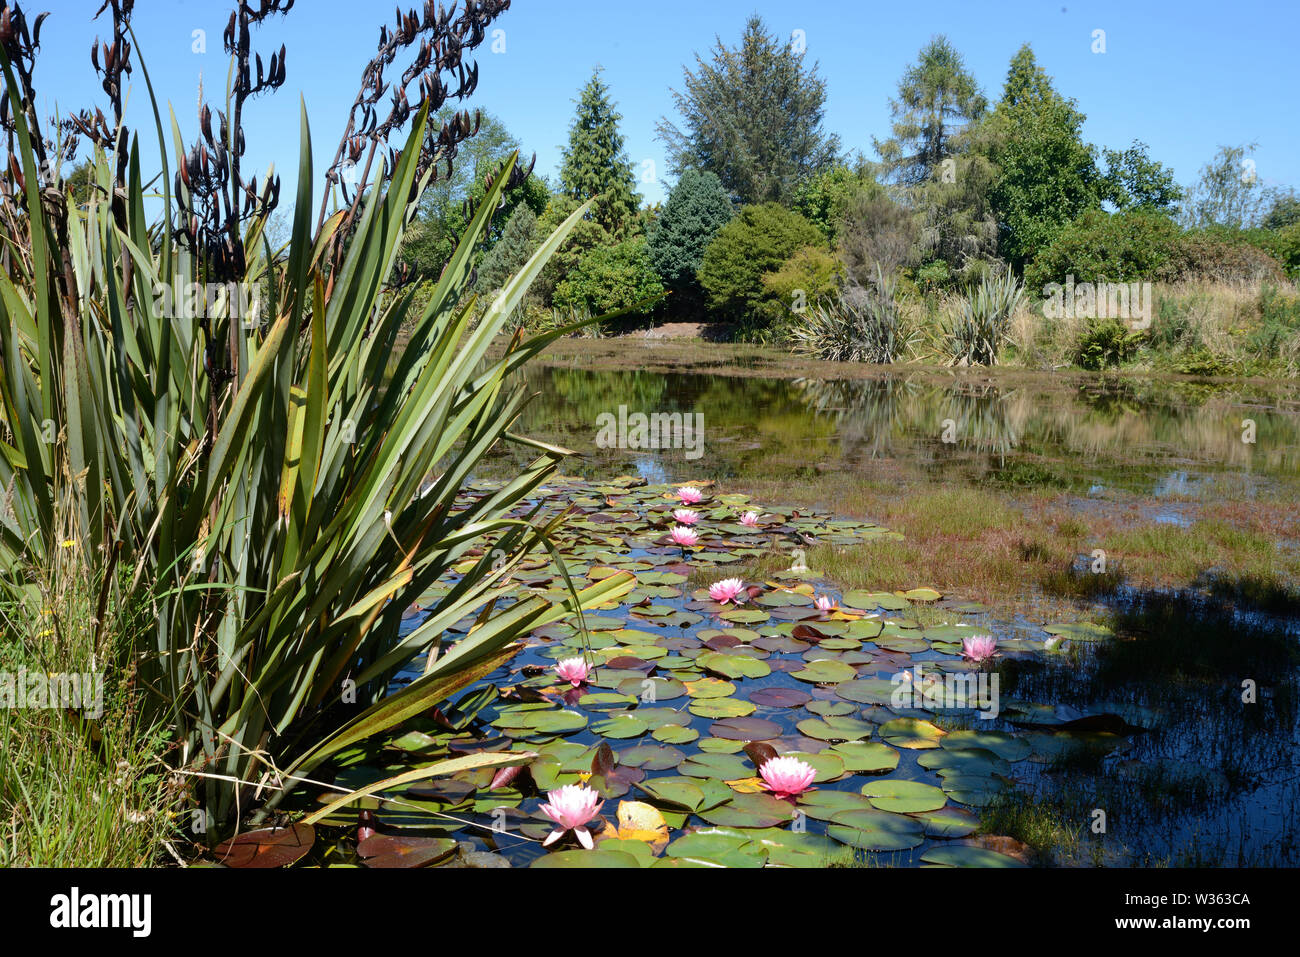 landscape of water lilies growing on a pond Stock Photo